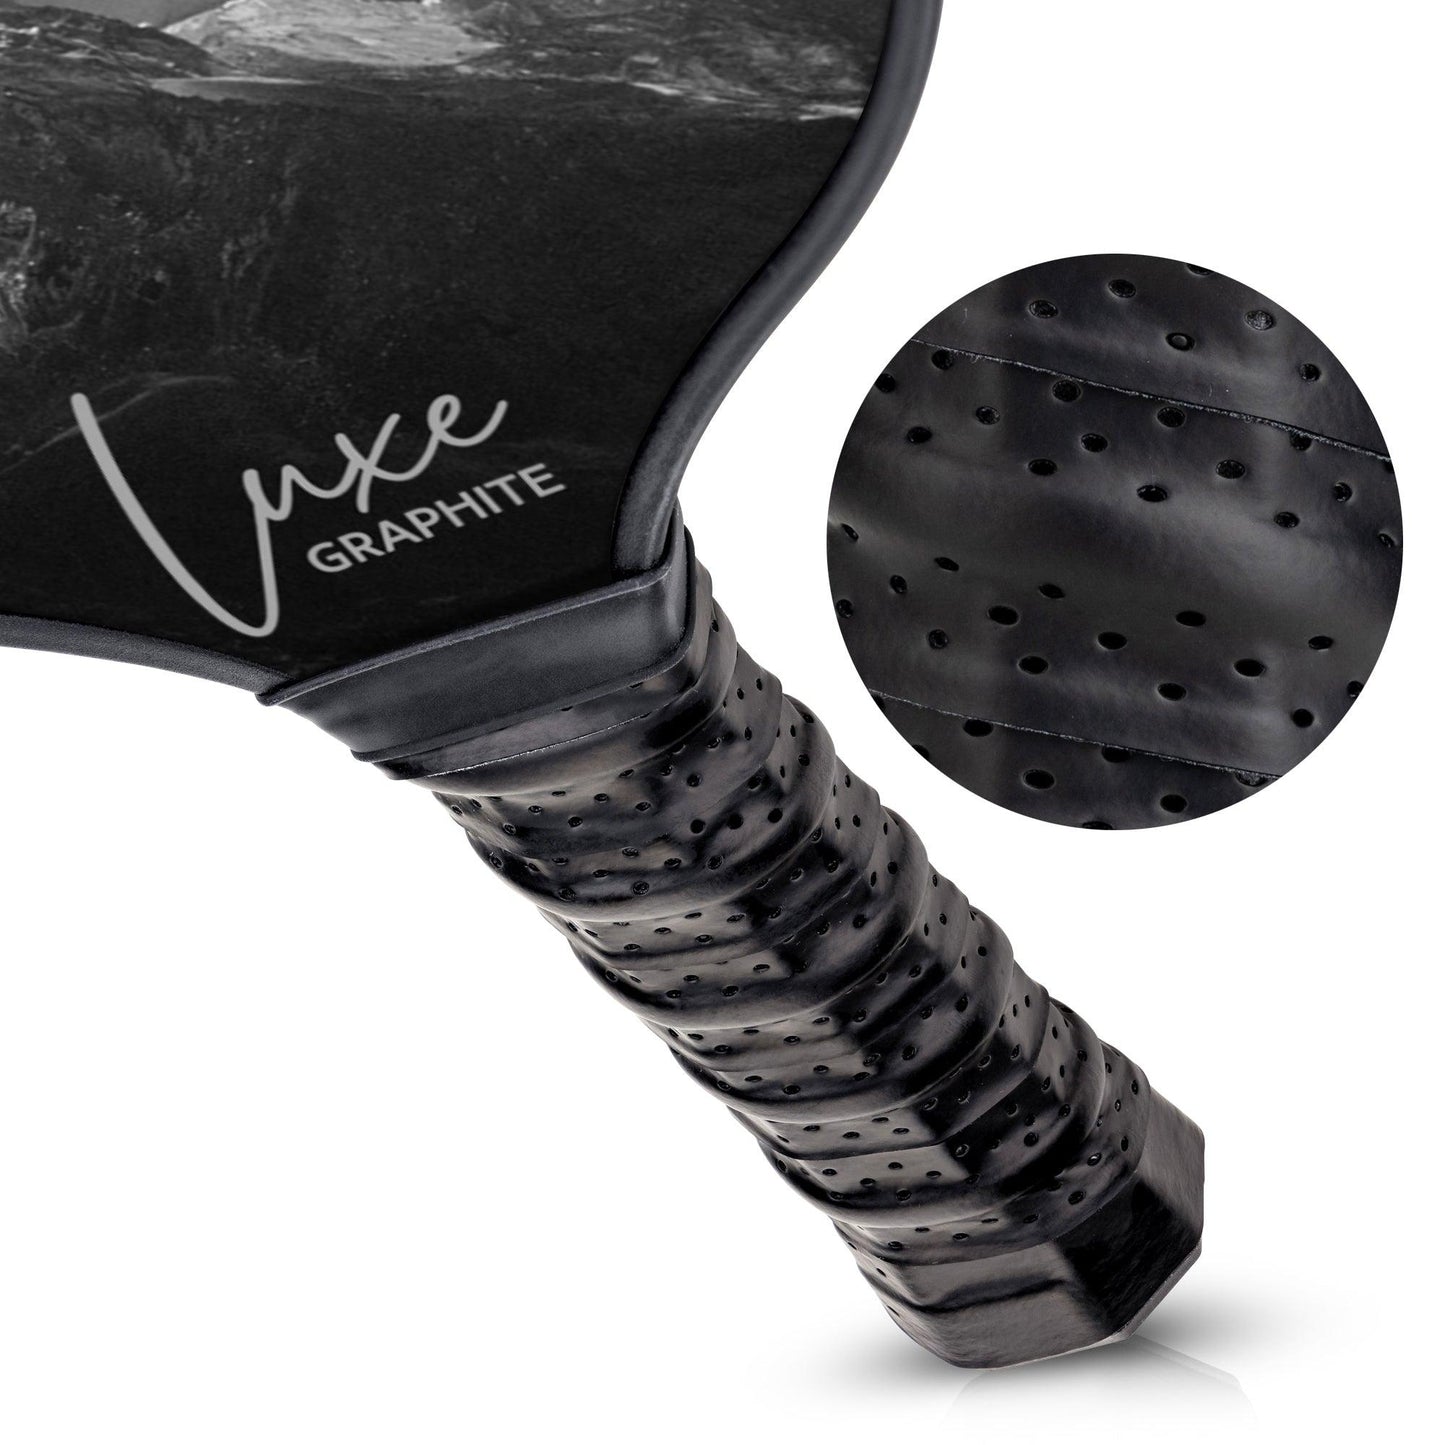 Holy Mother Luxe Graphite Pickleball Paddle with Cover